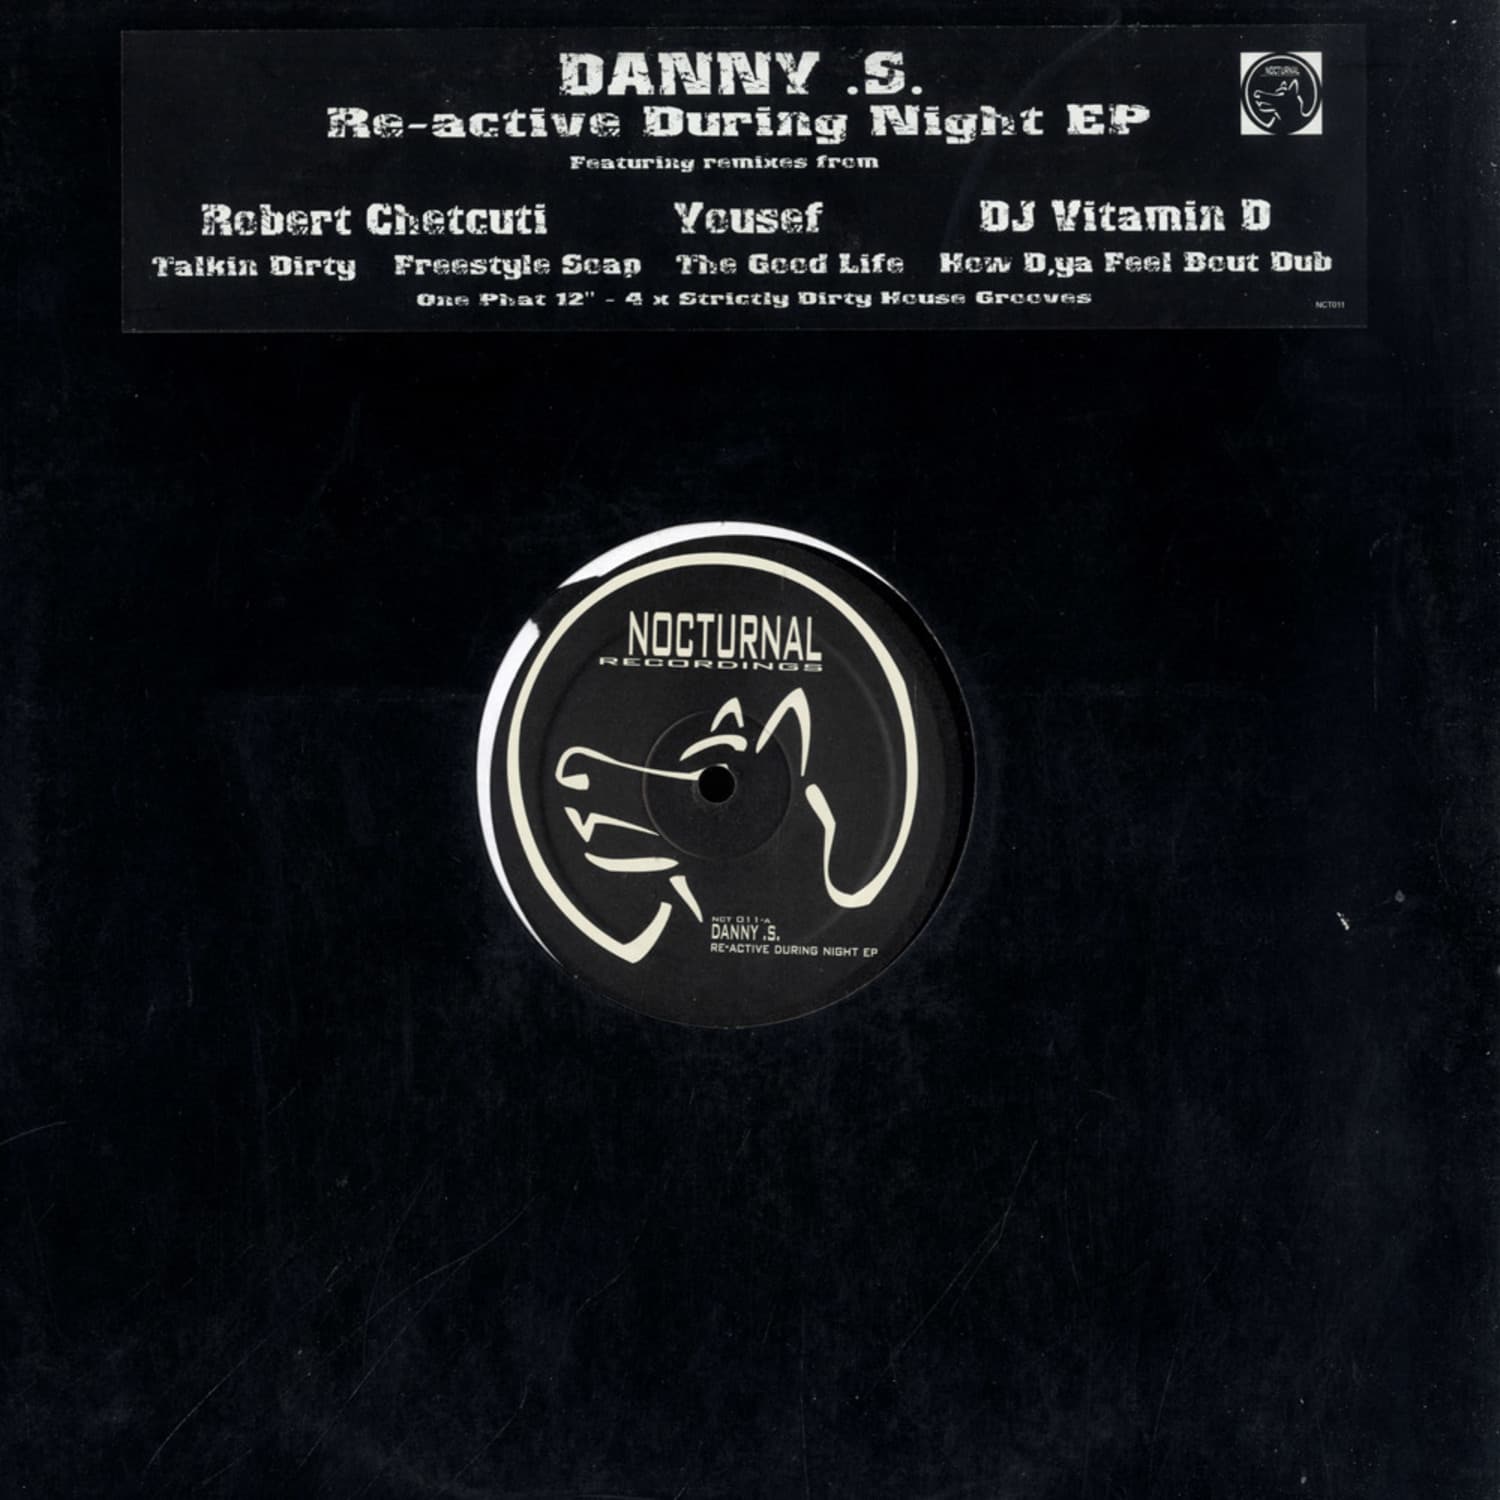 Danny S. - RE- ACTIVE DURING NIGHT EP